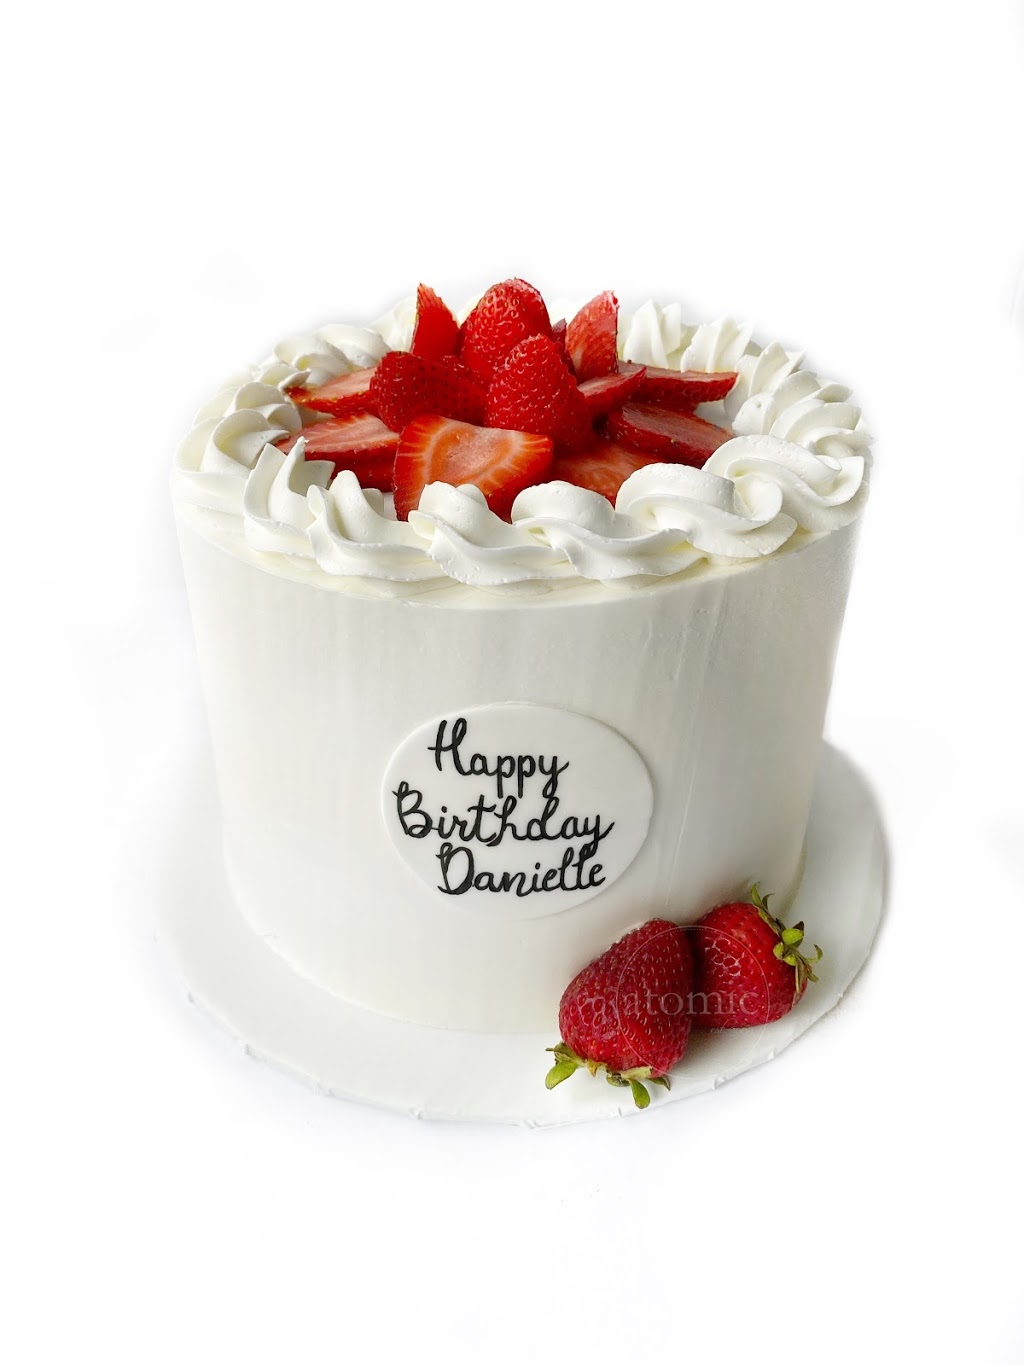 A.Tomic Cake Design | Laporte Ave, Windsor, ON N8S 3R5, Canada | Phone: (519) 566-6599